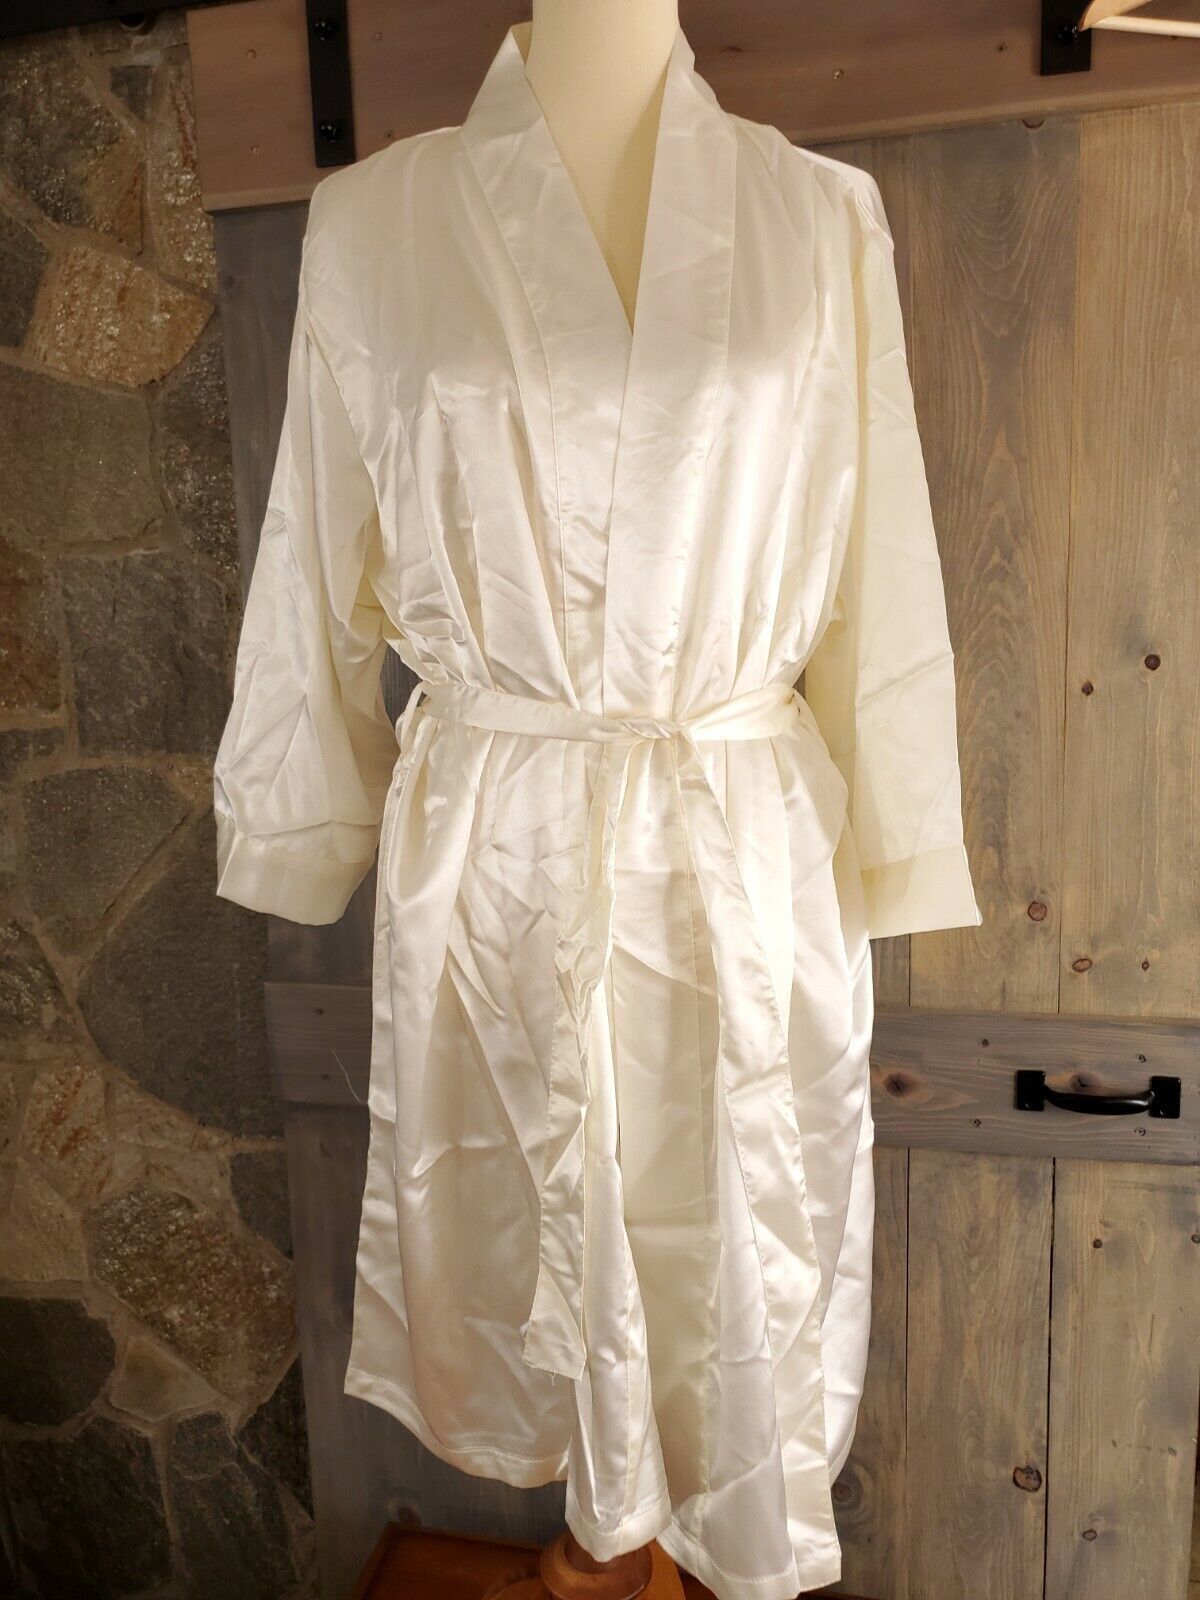 Primary image for Lillian Rose Bride Satin Robe Ivory White Size L/XL